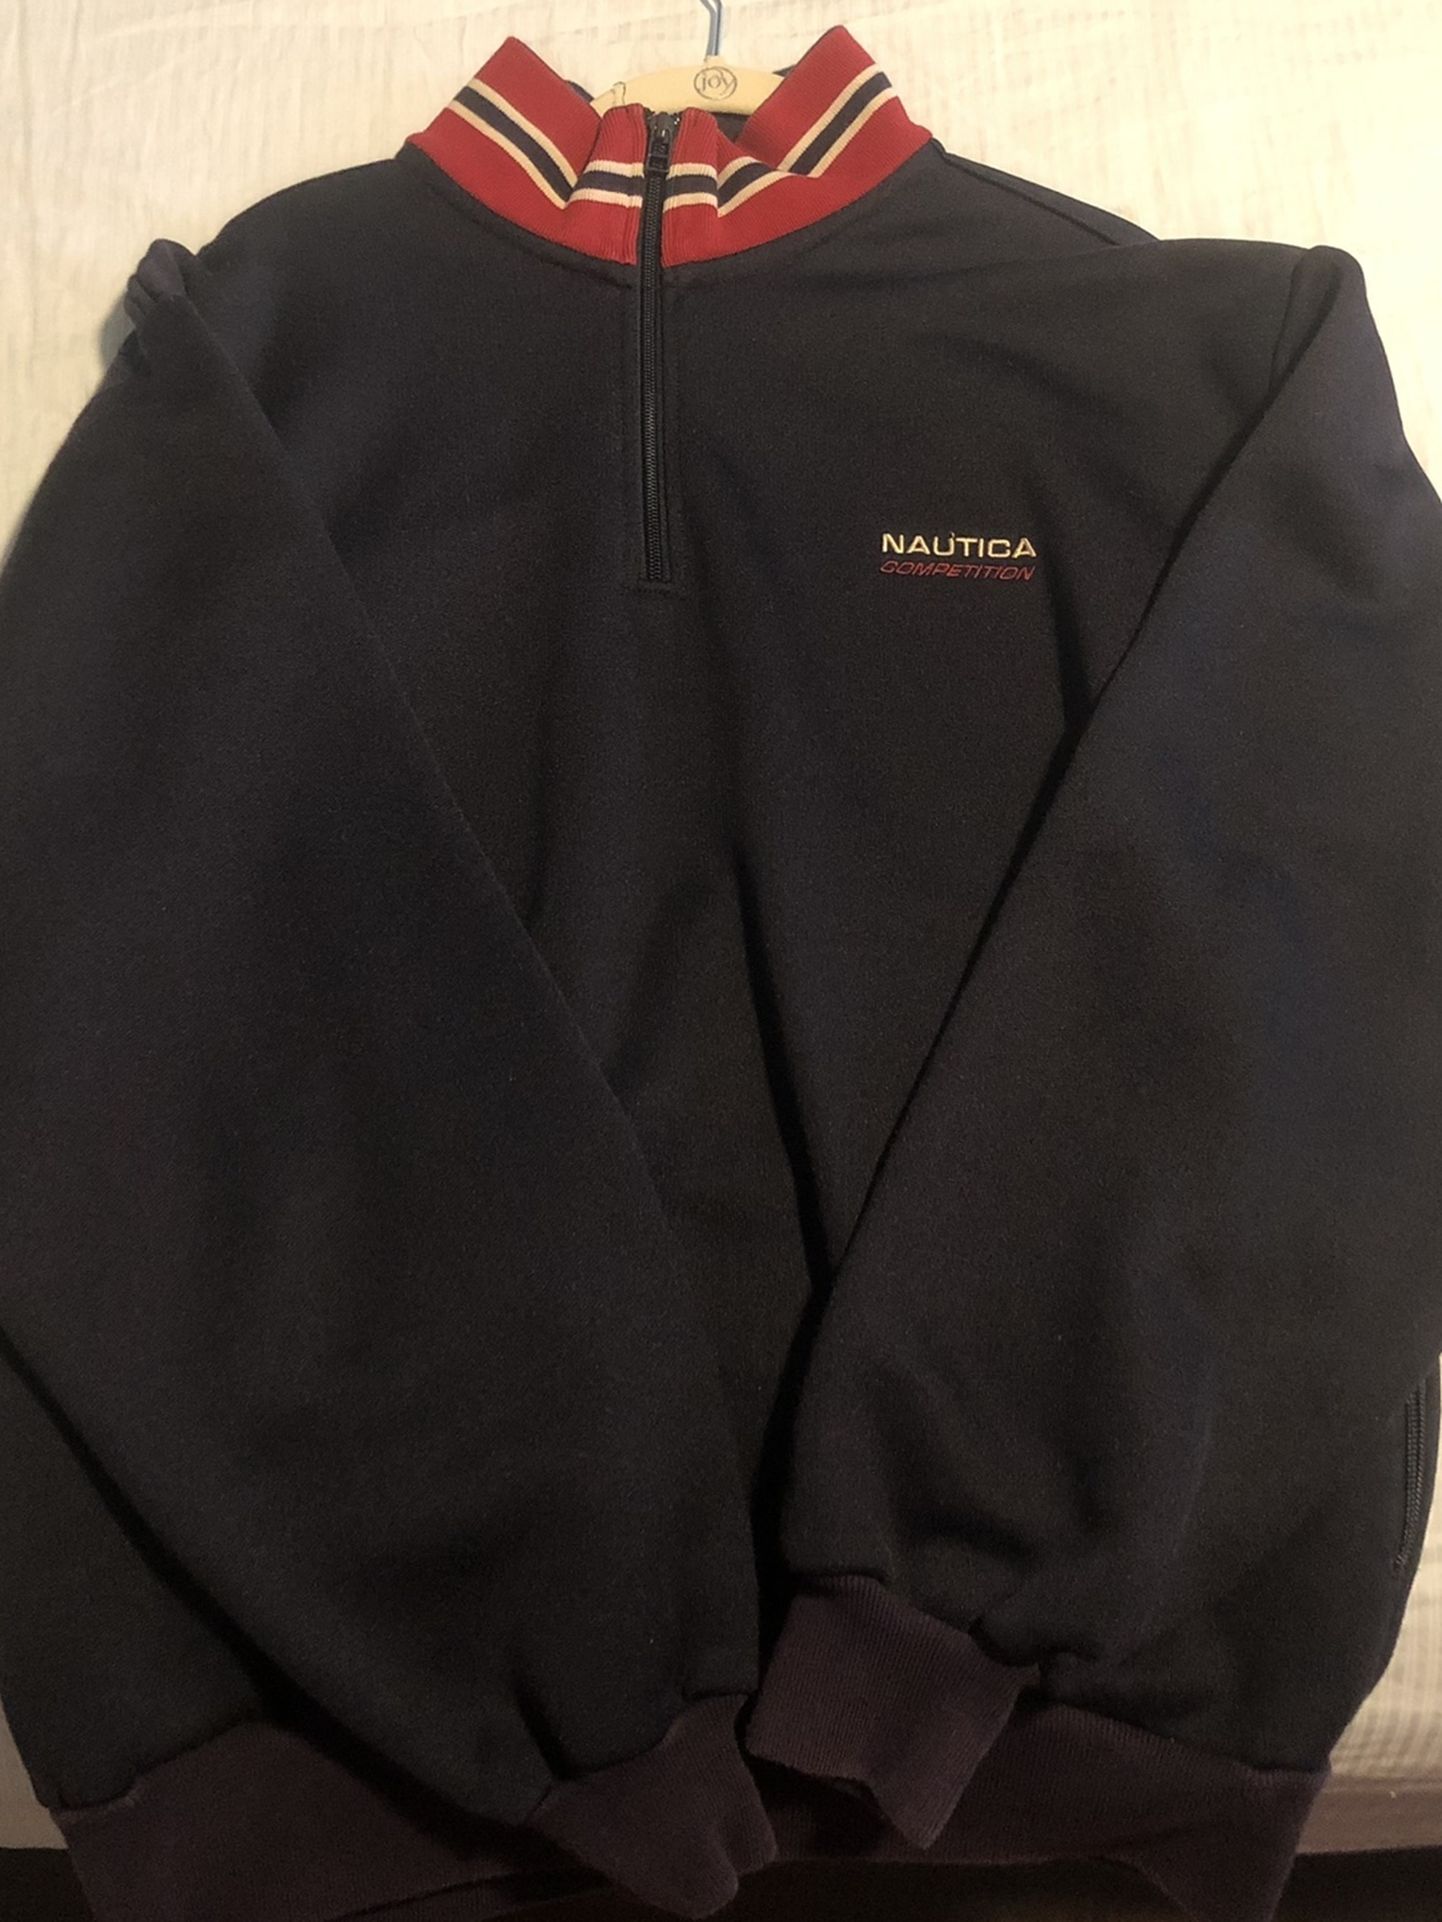 Vintage Nautica Competition Jackets